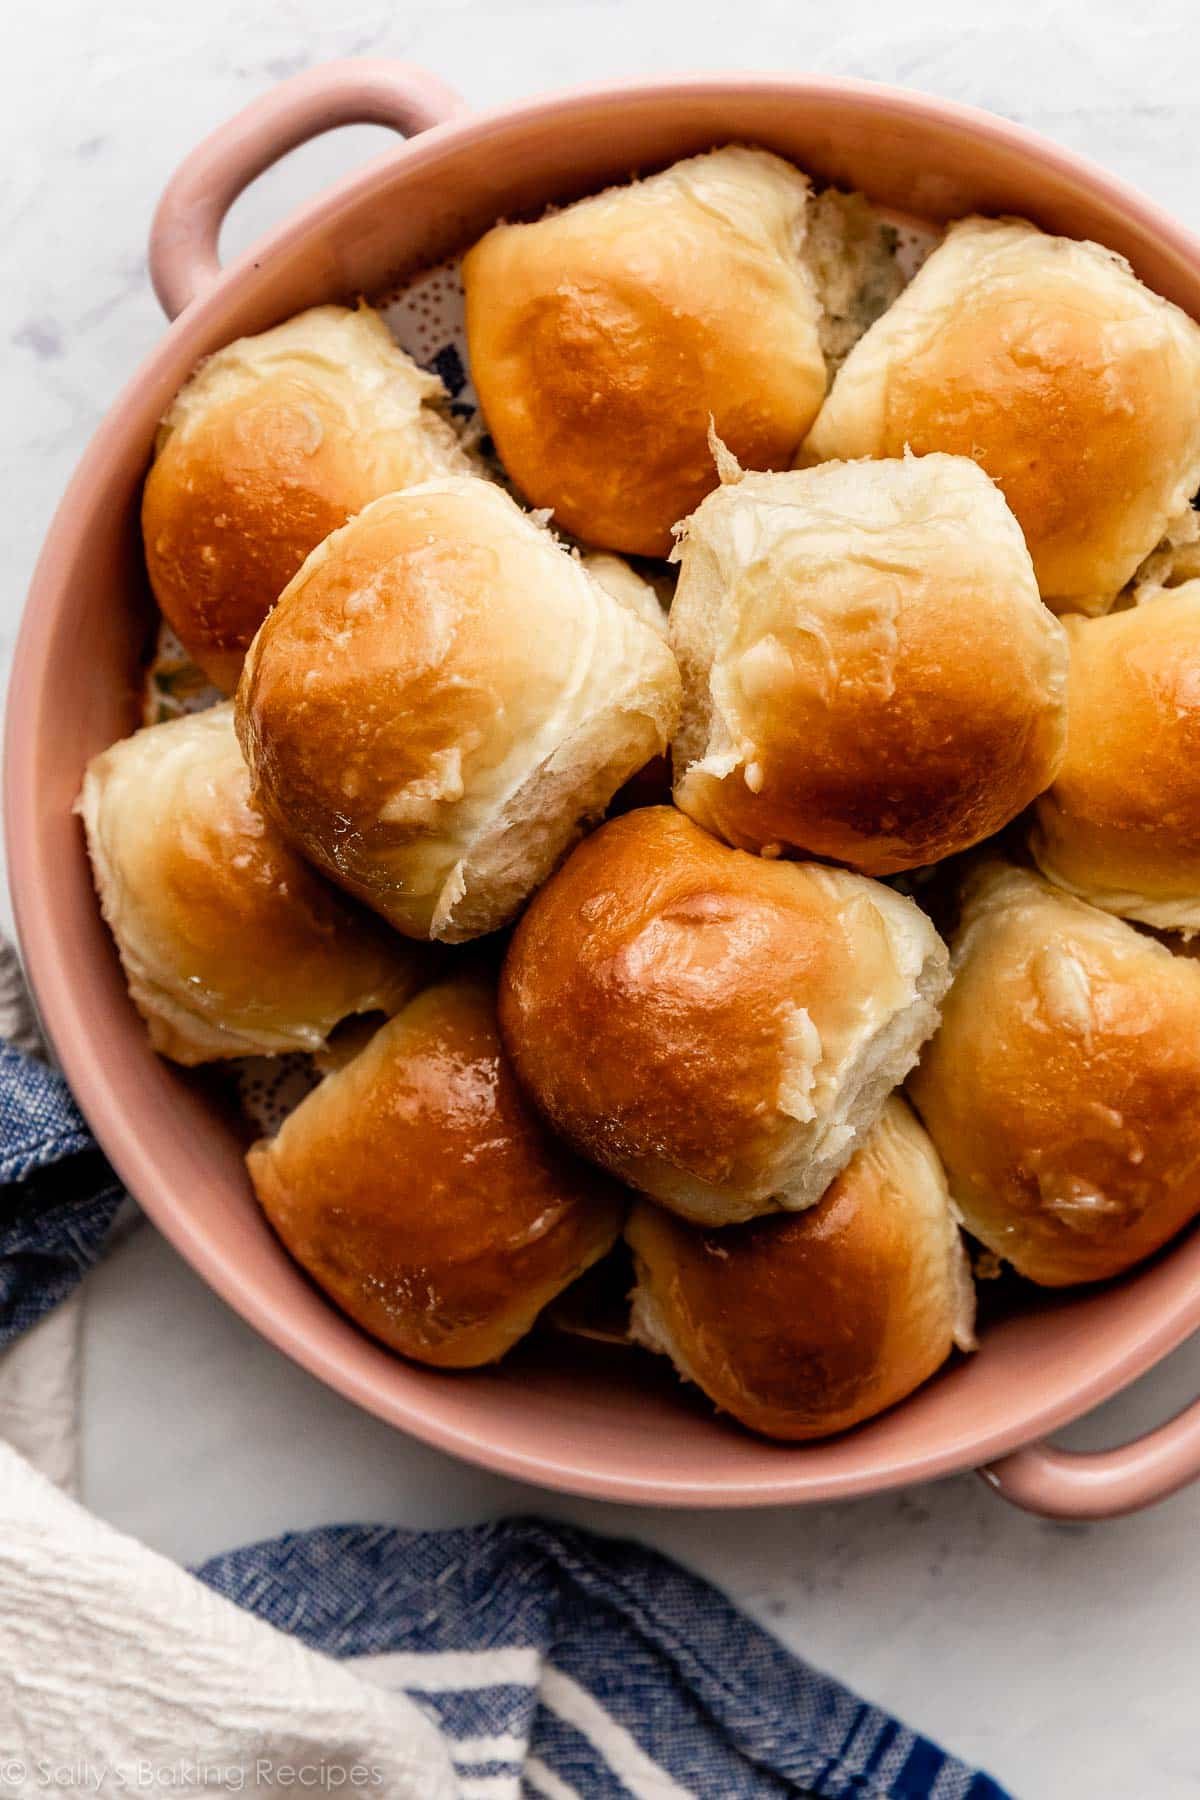 Lambert'S Rolls Recipe  : Delicious and Easy-to-Make Dinner Rolls